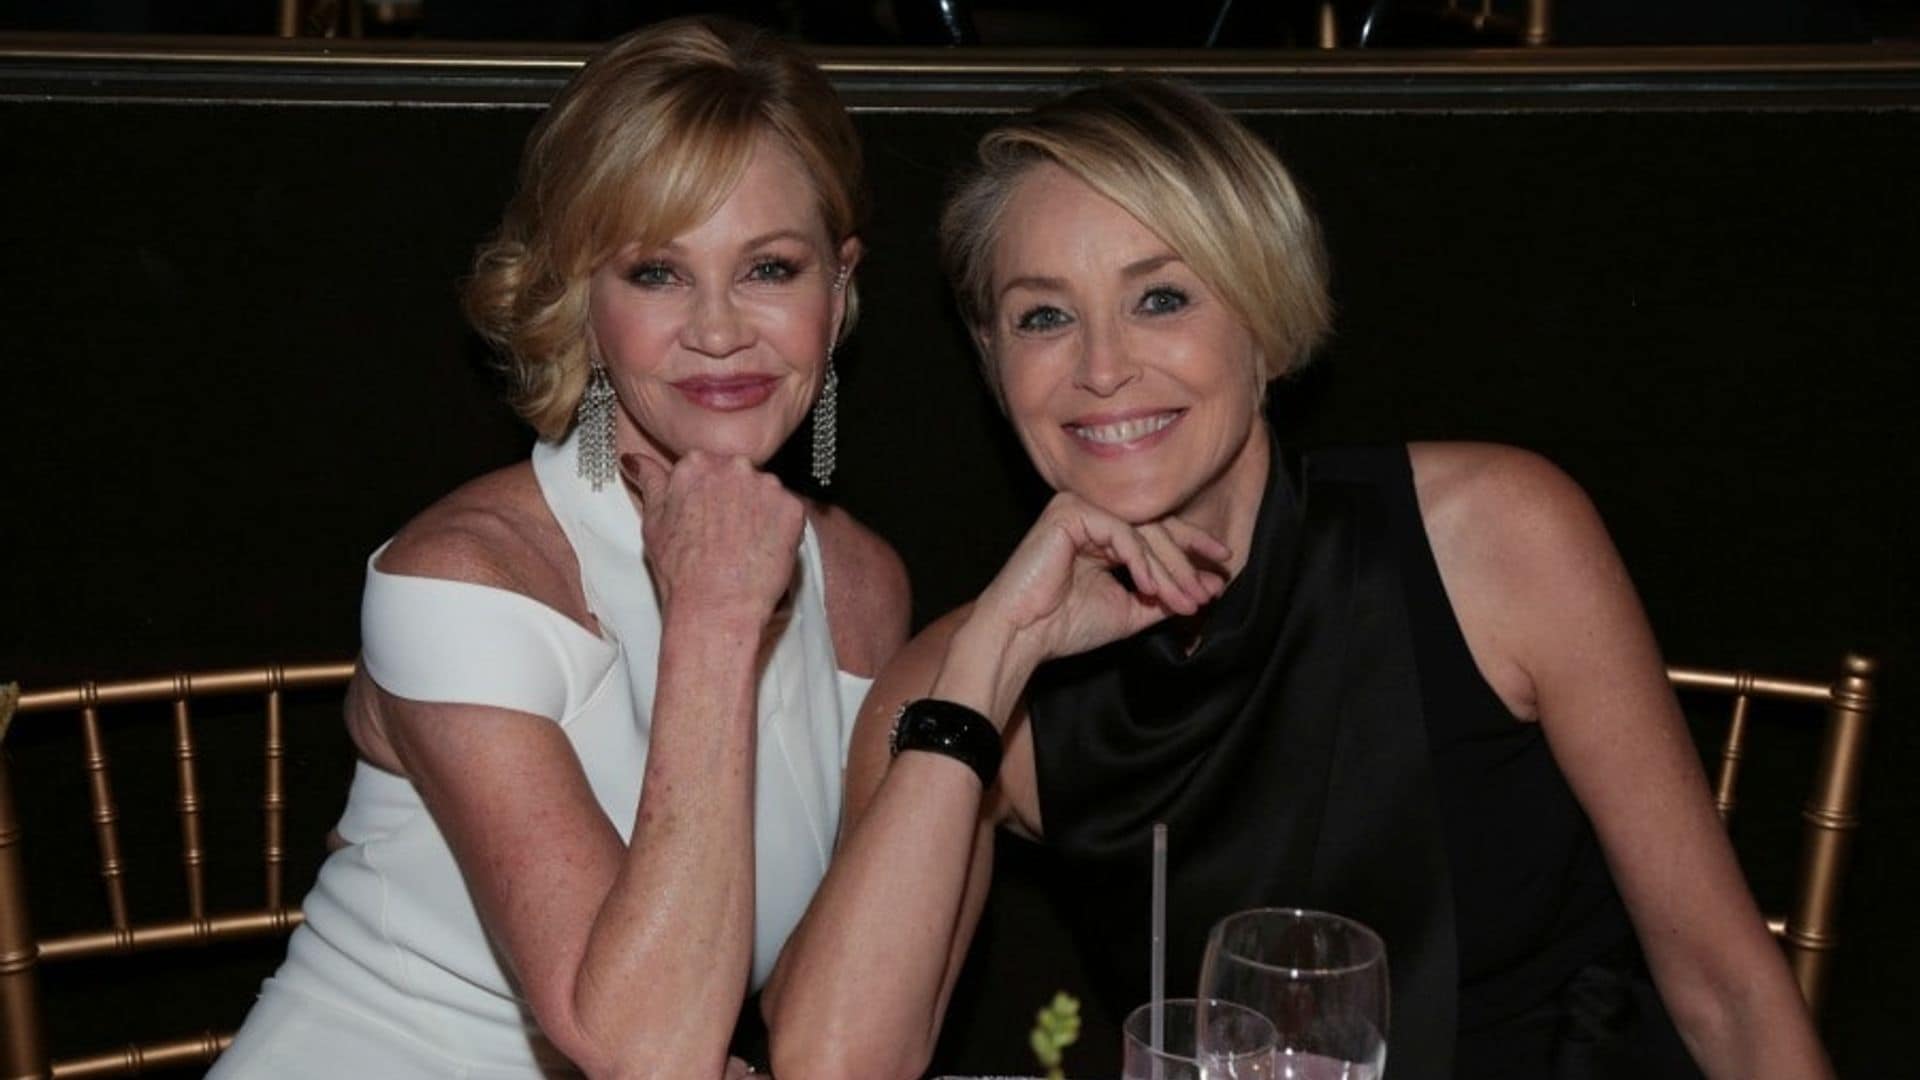 Celebrity week in photos: Sharon Stone and Melanie Griffith have a ball in L.A. and more